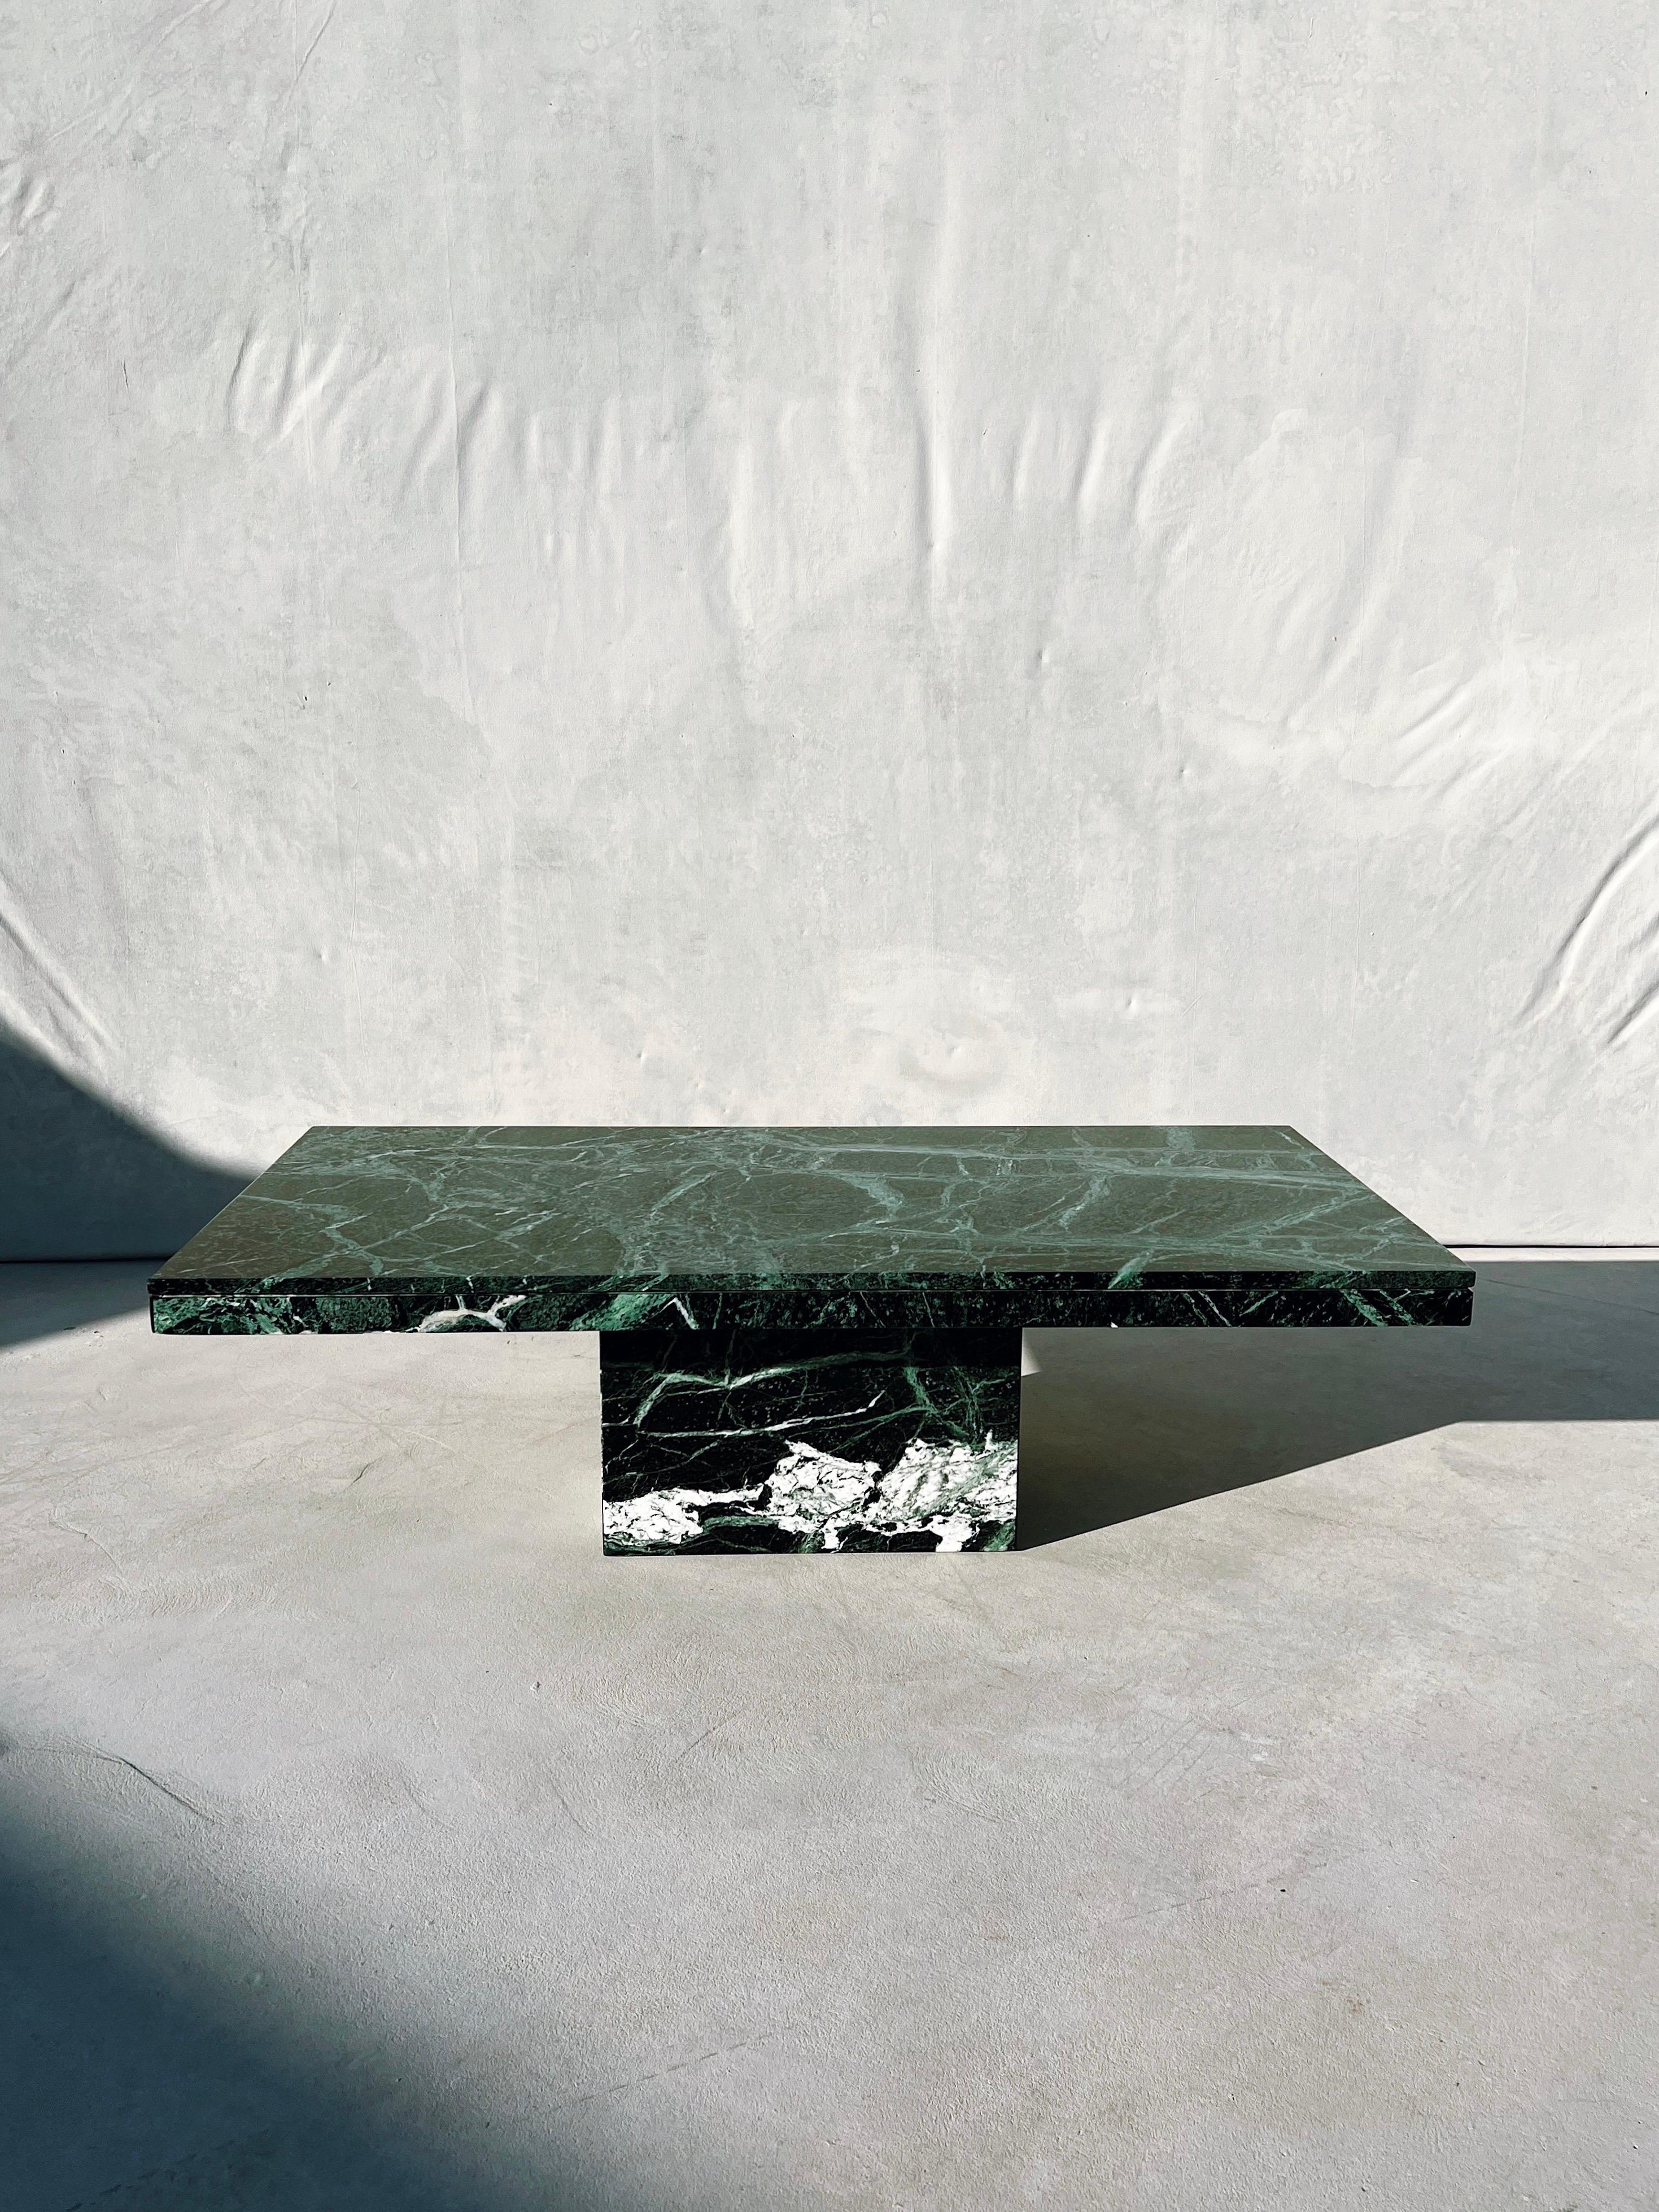 1970s Vintage Italian Green Verde Alpi marble rectangle coffee table

This Italian vintage coffee table is made of the ever-so-coveted Verde Alpi marble and it is sensational.
This type of marble dances with intricate veining, reminiscent of